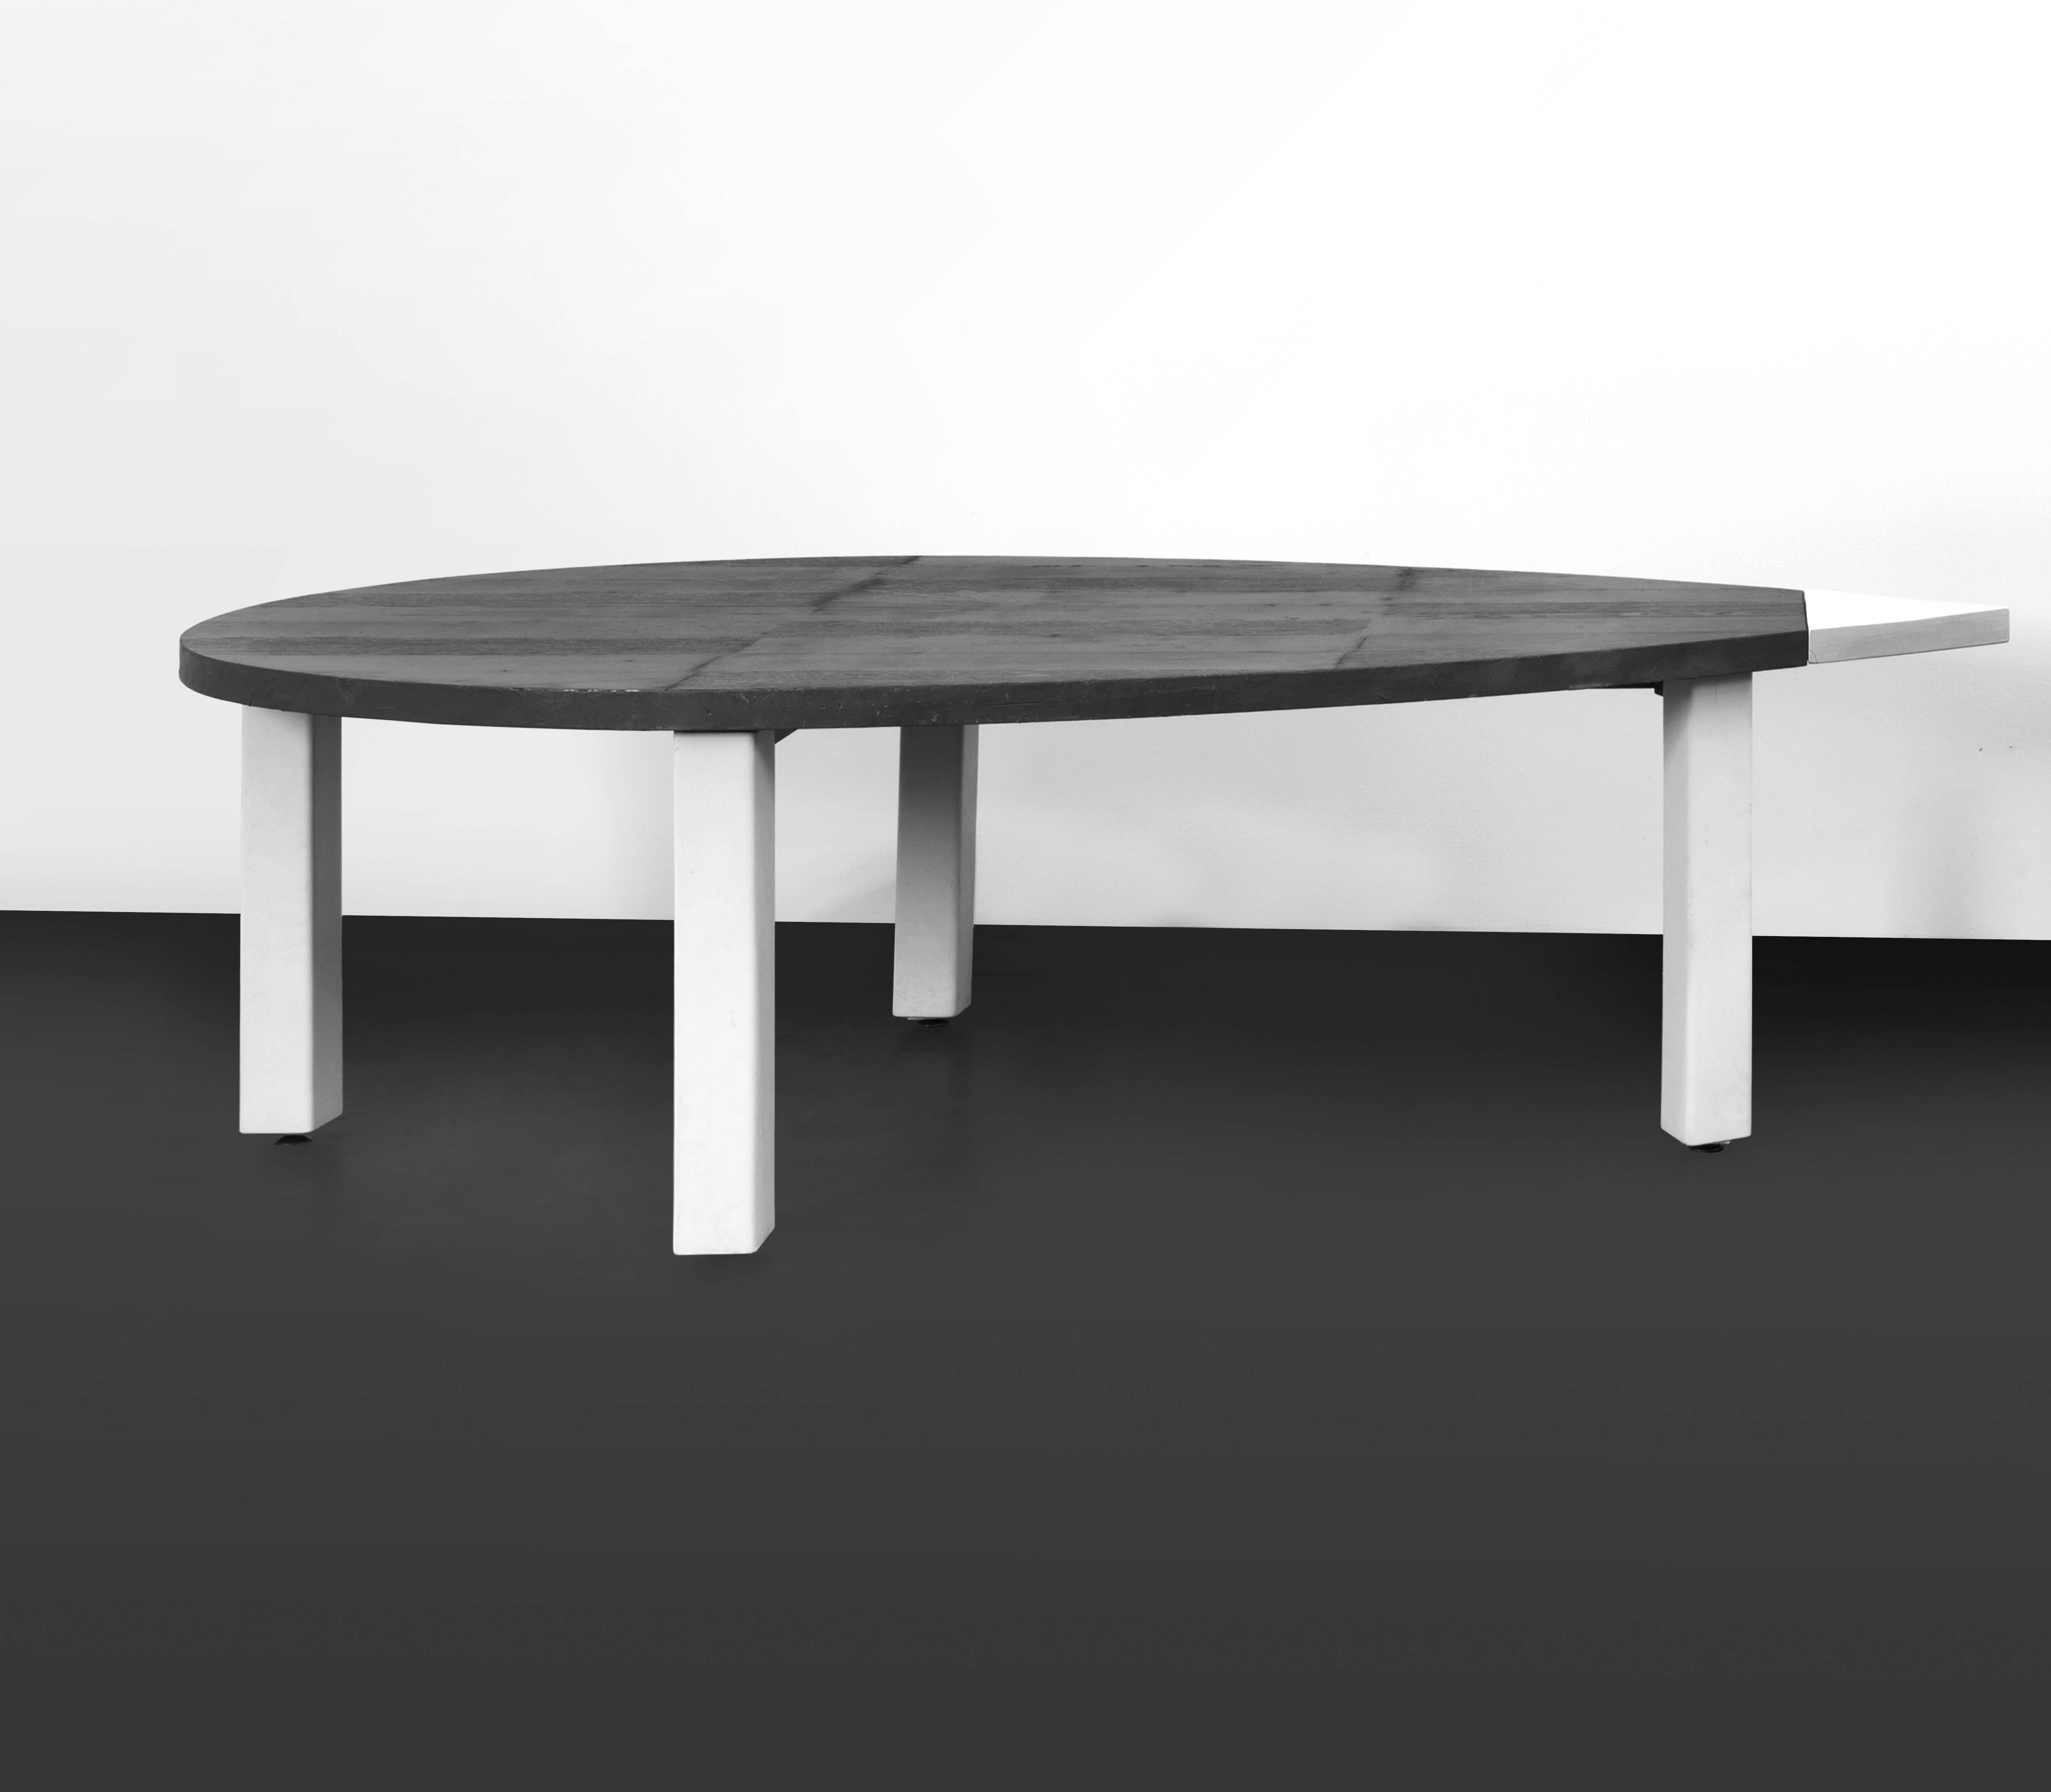 Pierpaolo Calzolari (1943), Laguna tables in two elements,
oak and beechwood, burnt cedar, lead and earthenware,
circa 1980, Italy.
Measurements each table:
Height 75 cm, width 2m50, depth 1m26,
total width (two tables): 5 m.

Biography: Ad Usum